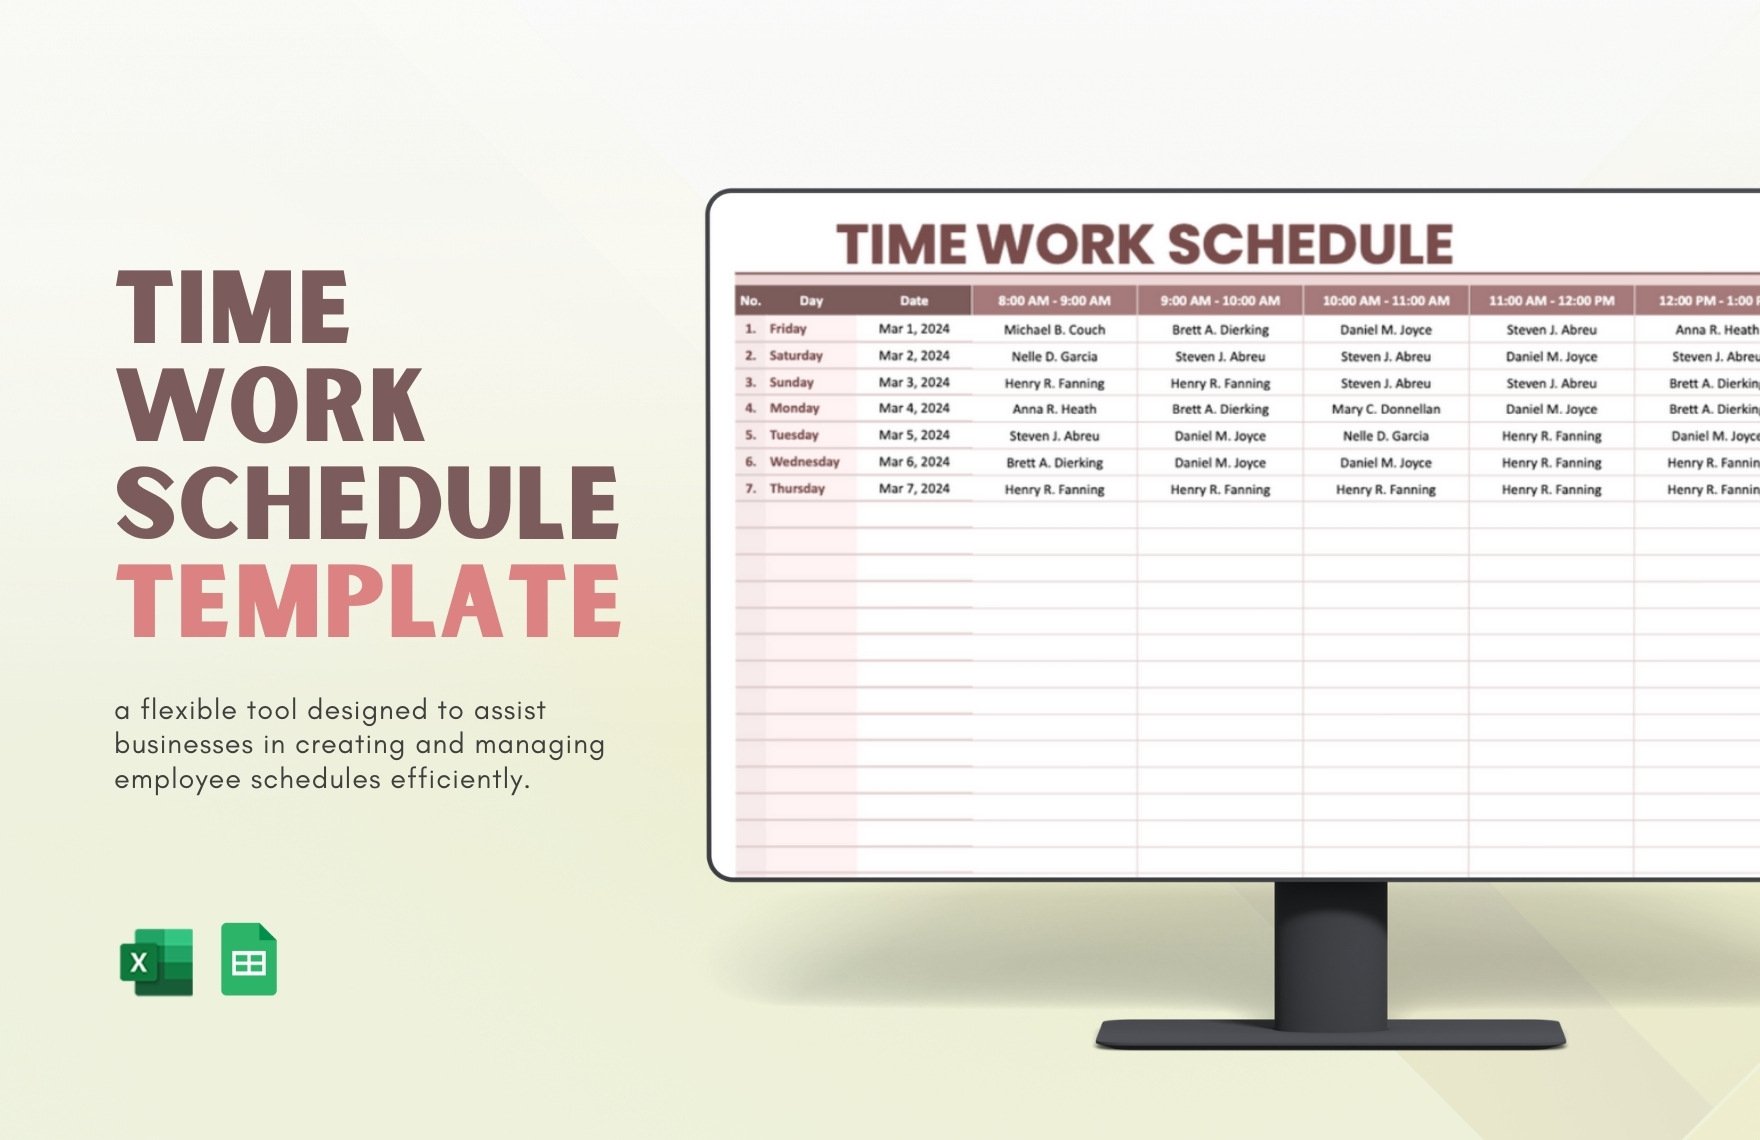 Time Work Schedule Template in Excel, Google Sheets